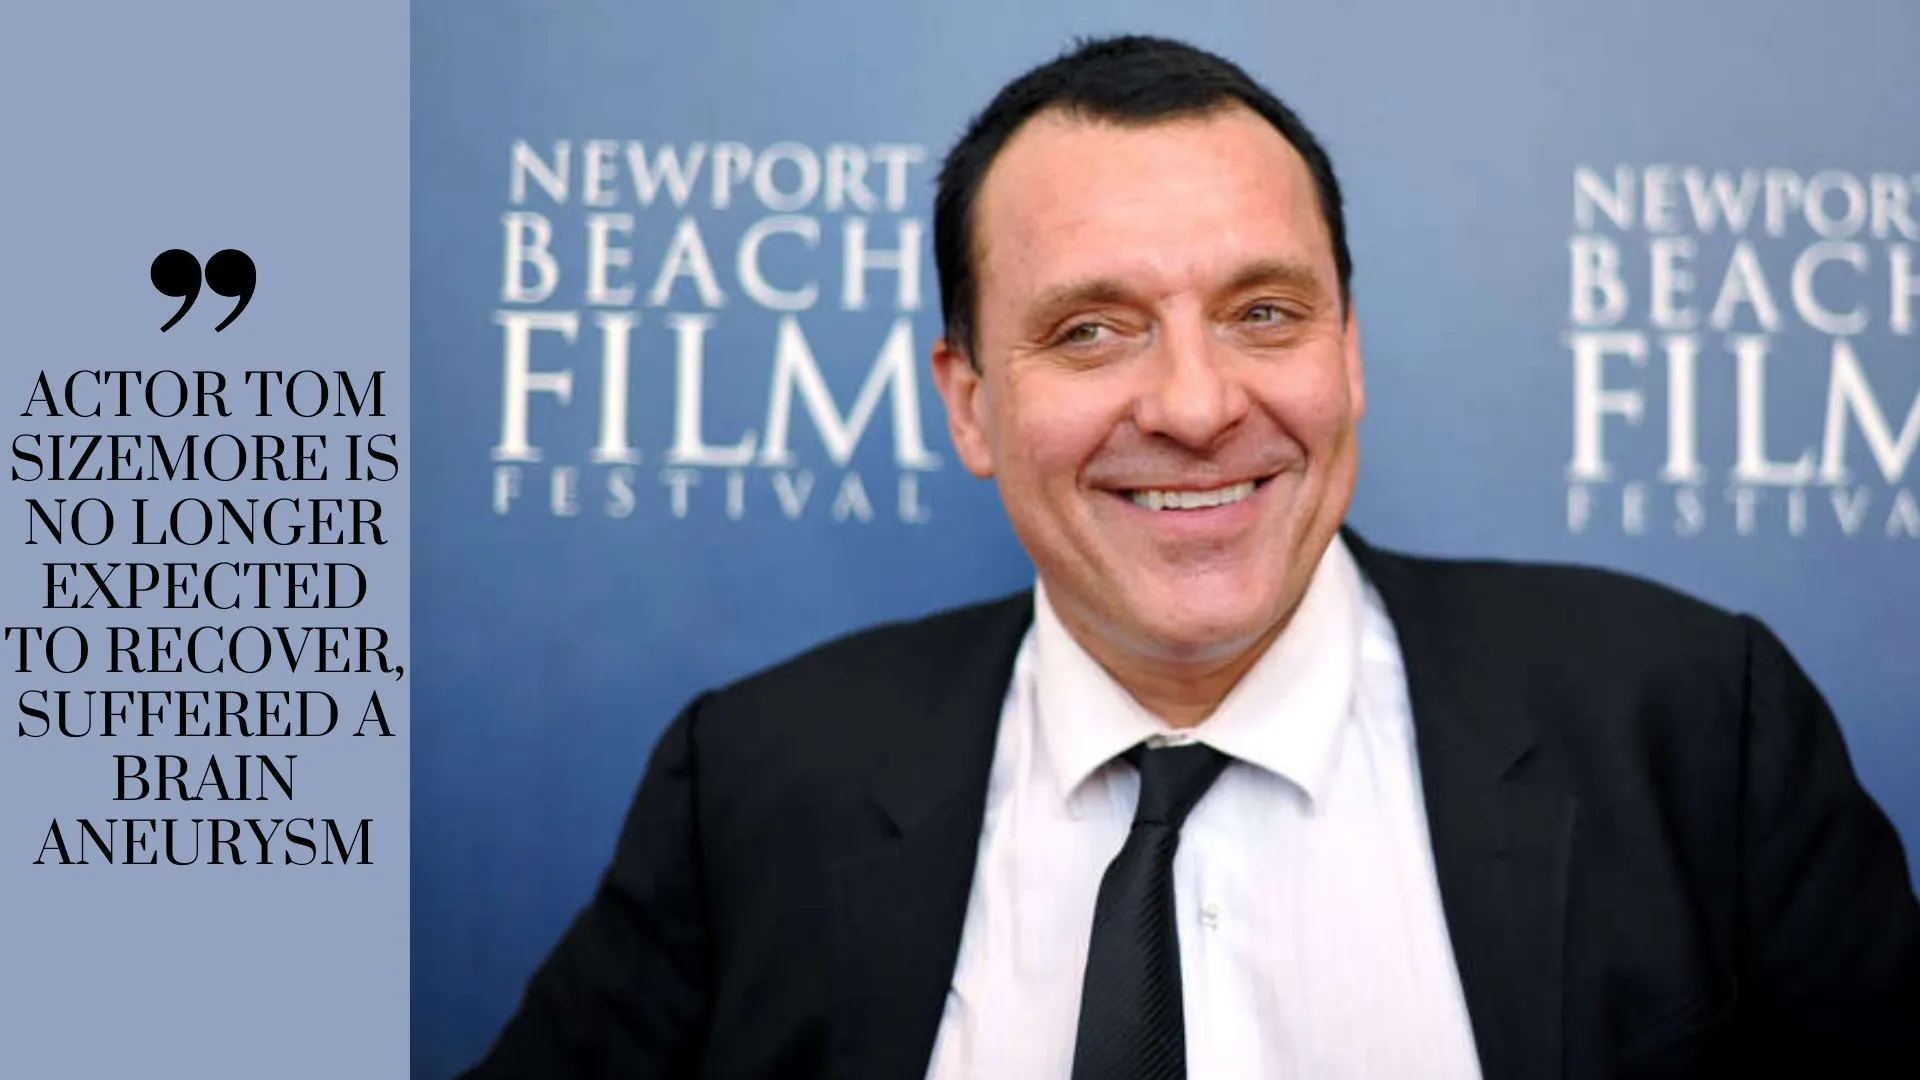 Actor Tom Sizemore is no longer expected to recover, suffered a brain aneurysm (Image credit: MSN)